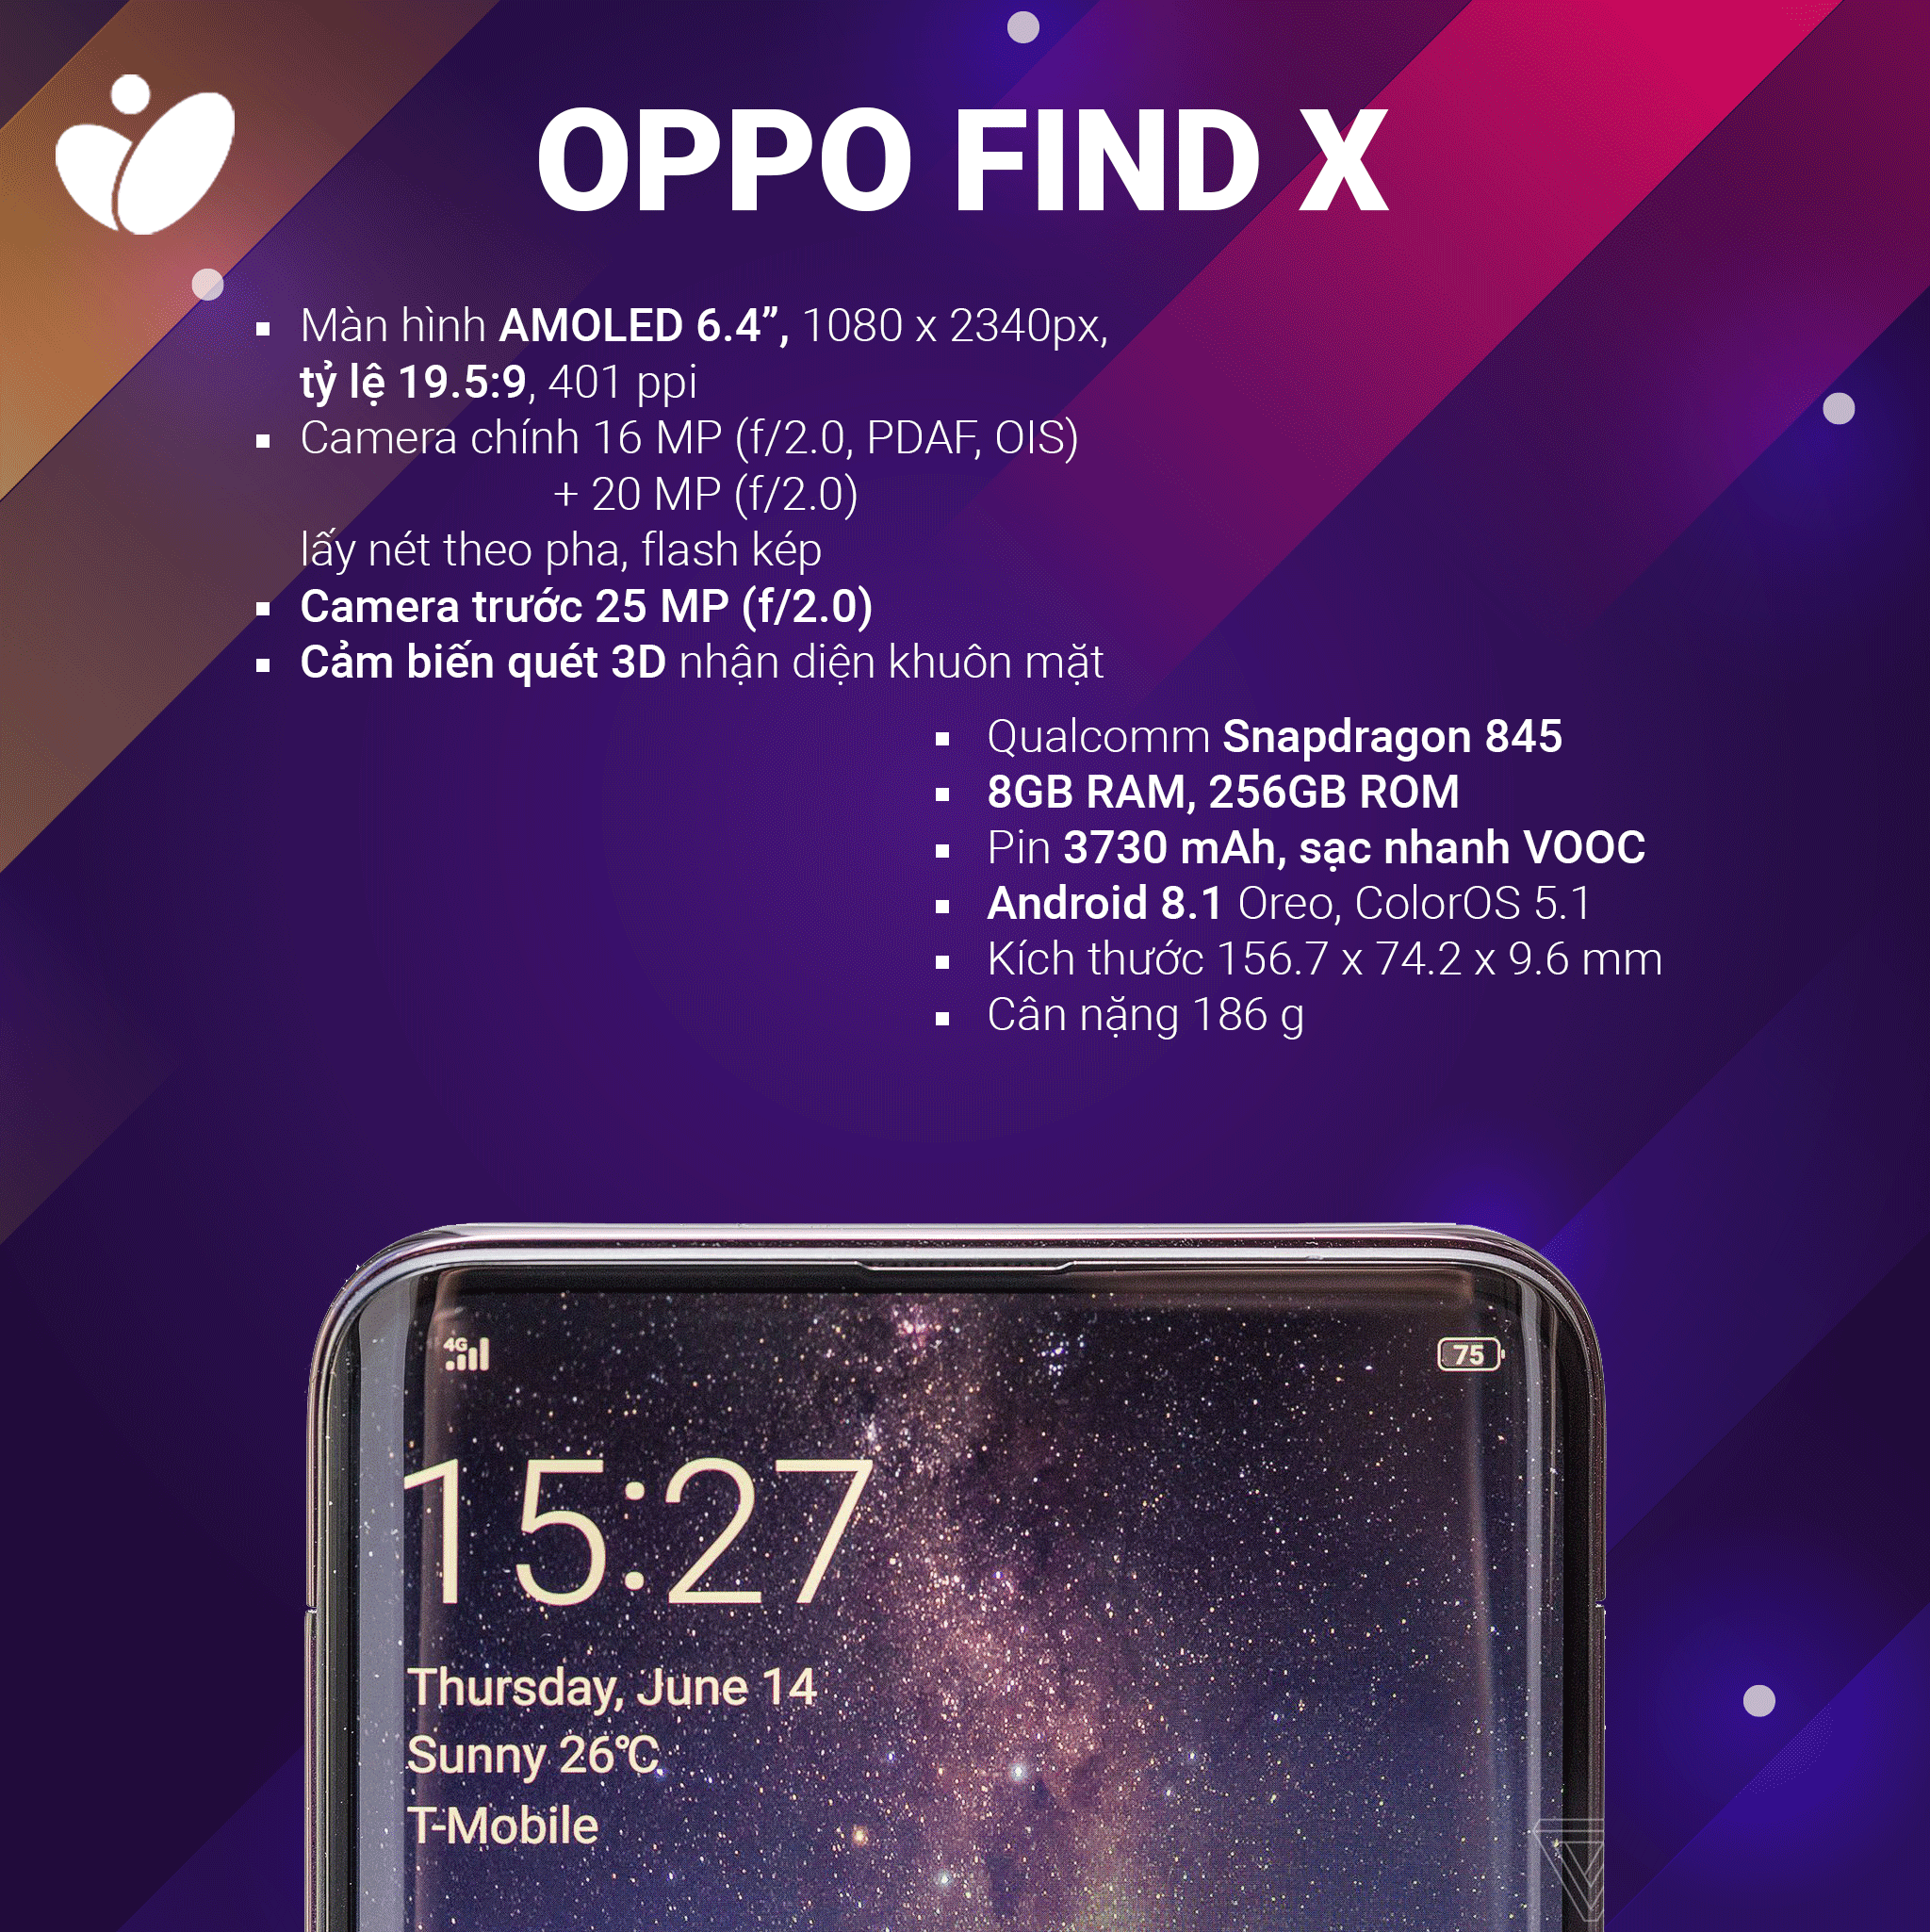 OPPO-FINDX.gif